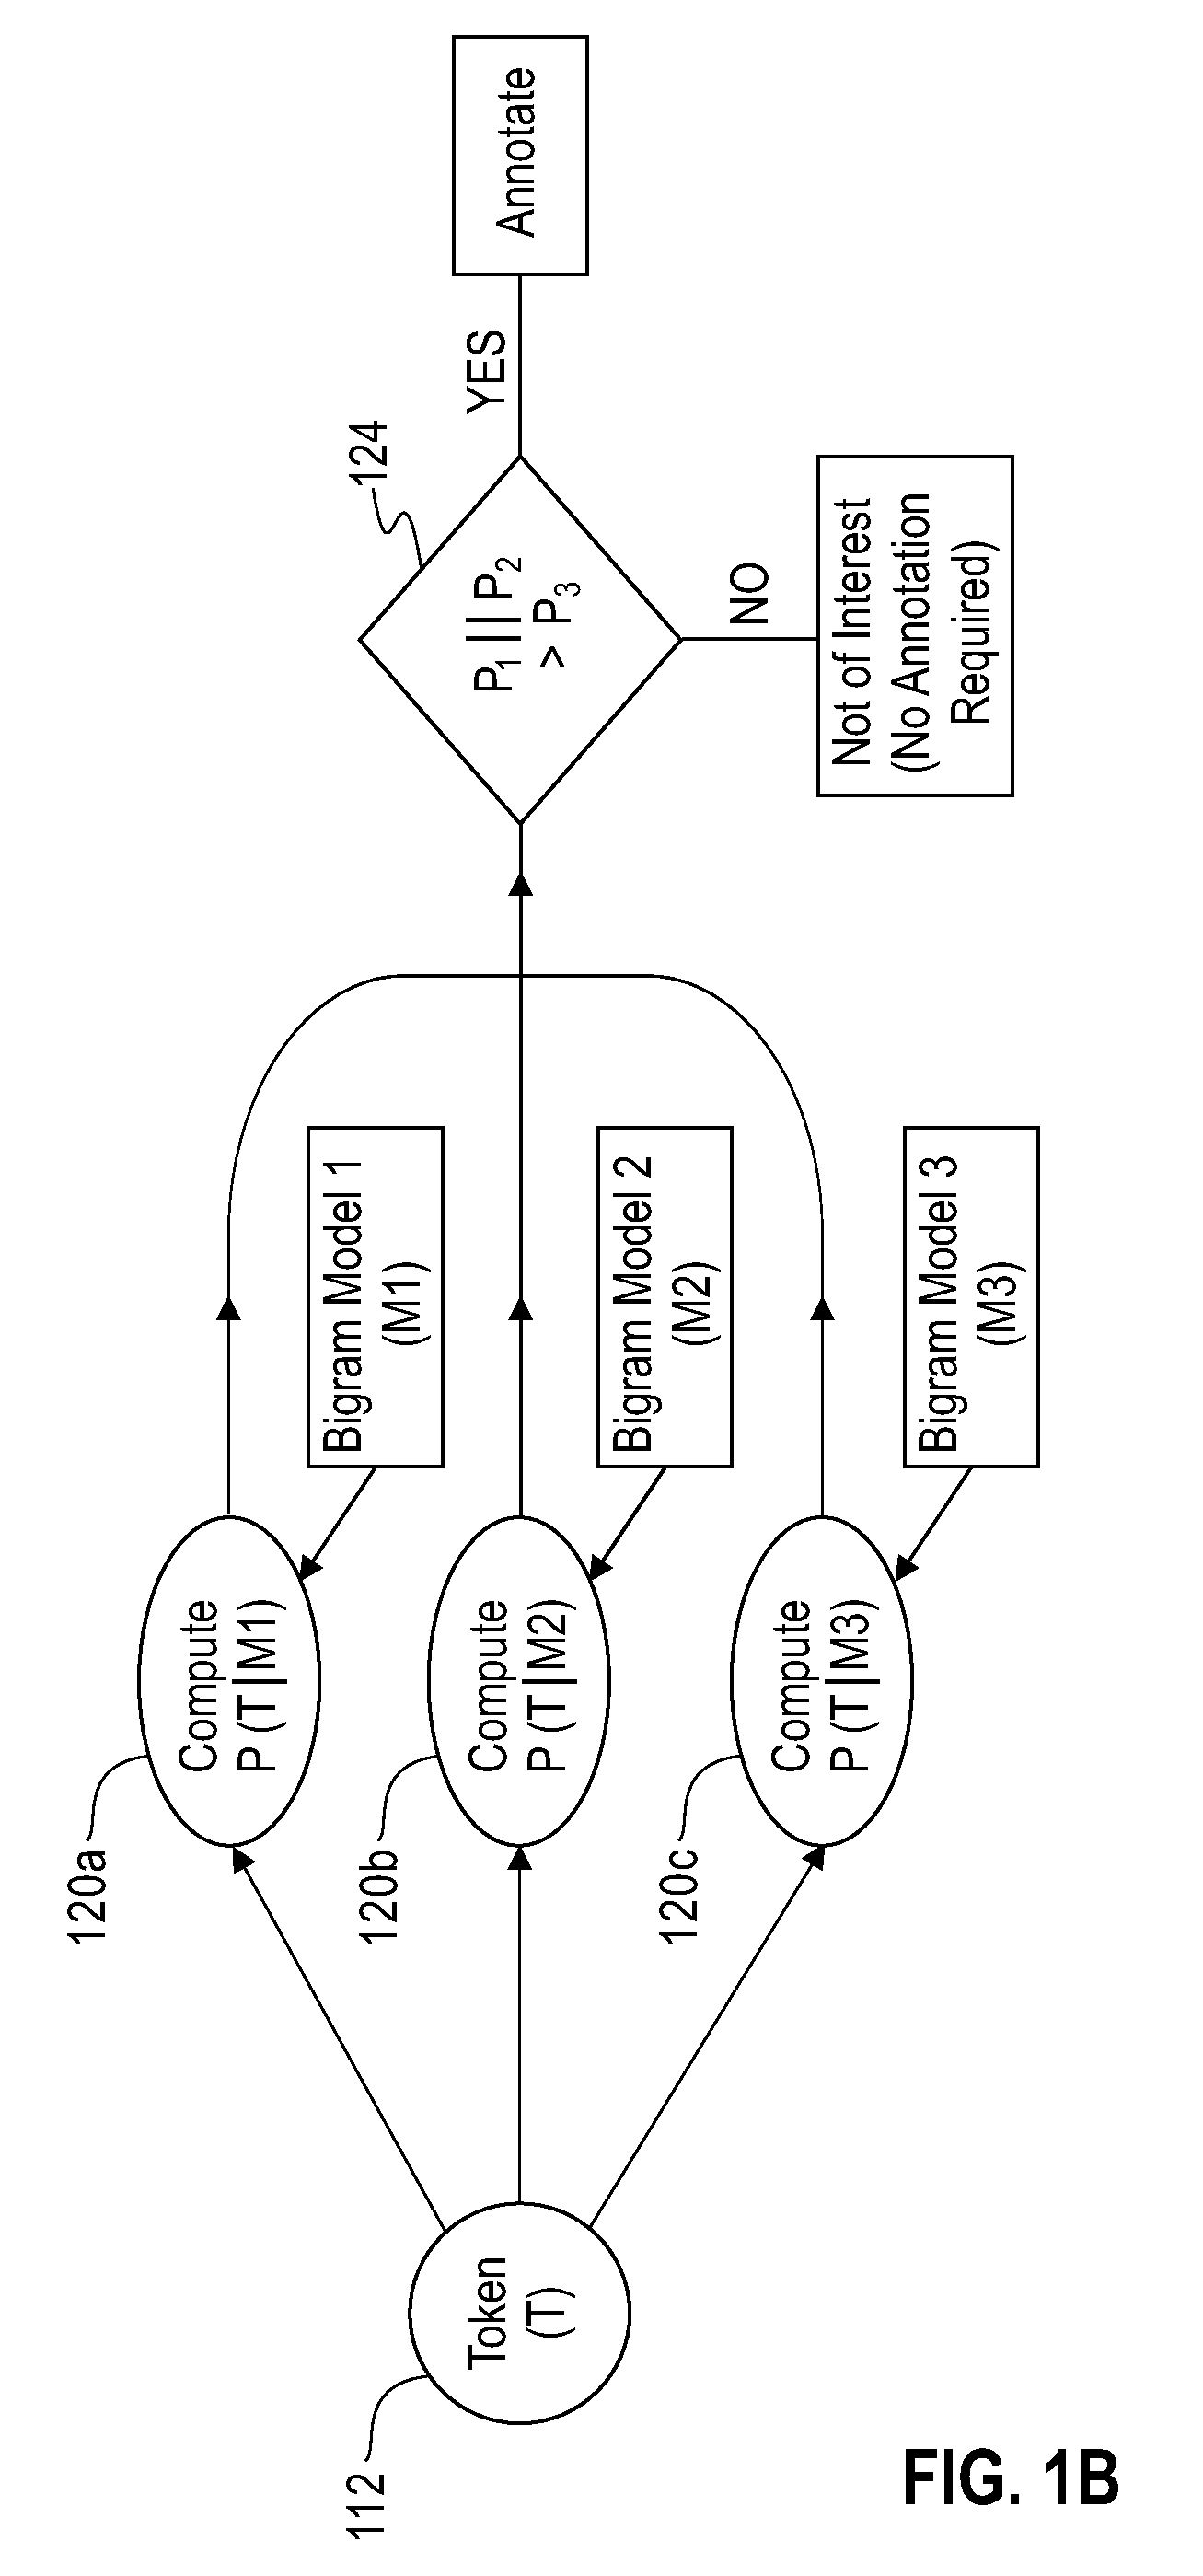 System and method for extracting entities of interest from text using n-gram models